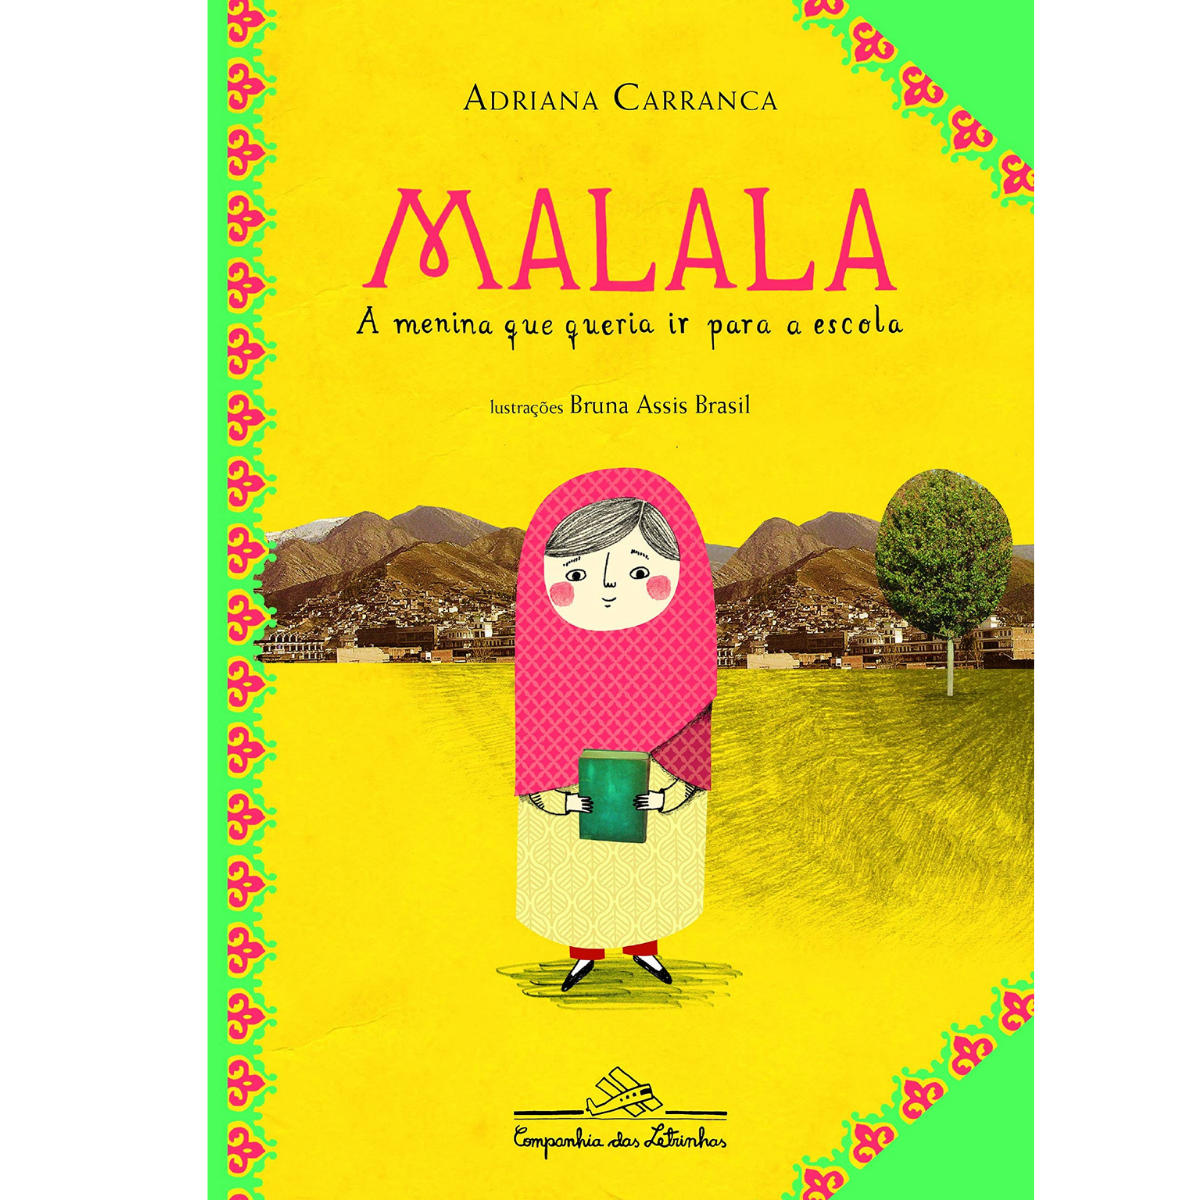 BOOK MALALA, THE GIRL WHO WANTED TO GO TO SCHOOL